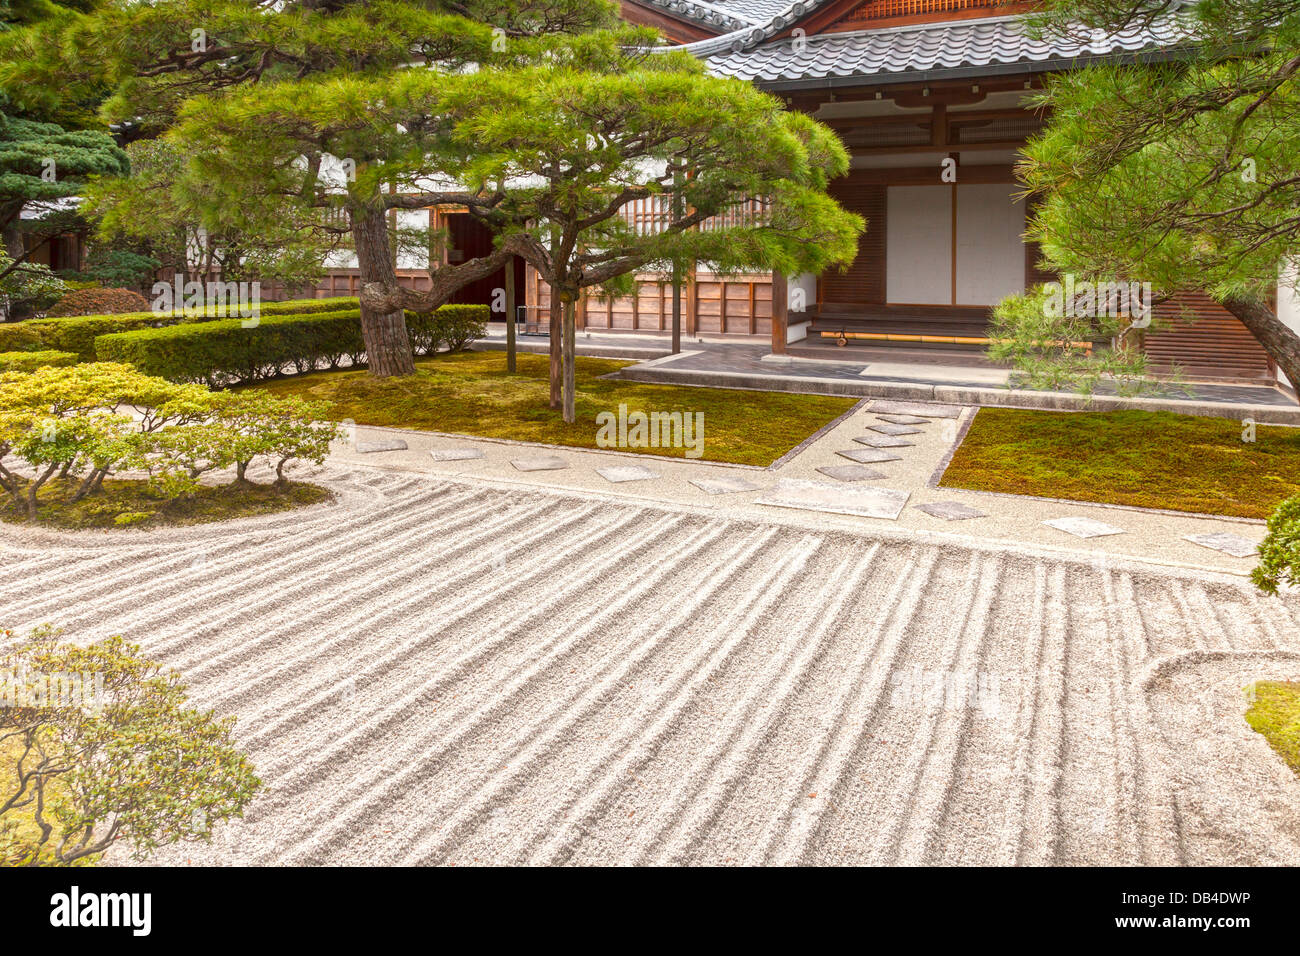 Part of the gardens of the temple of Ginkaku-ji or Jisho-ji in Kyoto, seen in autumn. This Zen Buddhist temple is a notable... Stock Photo